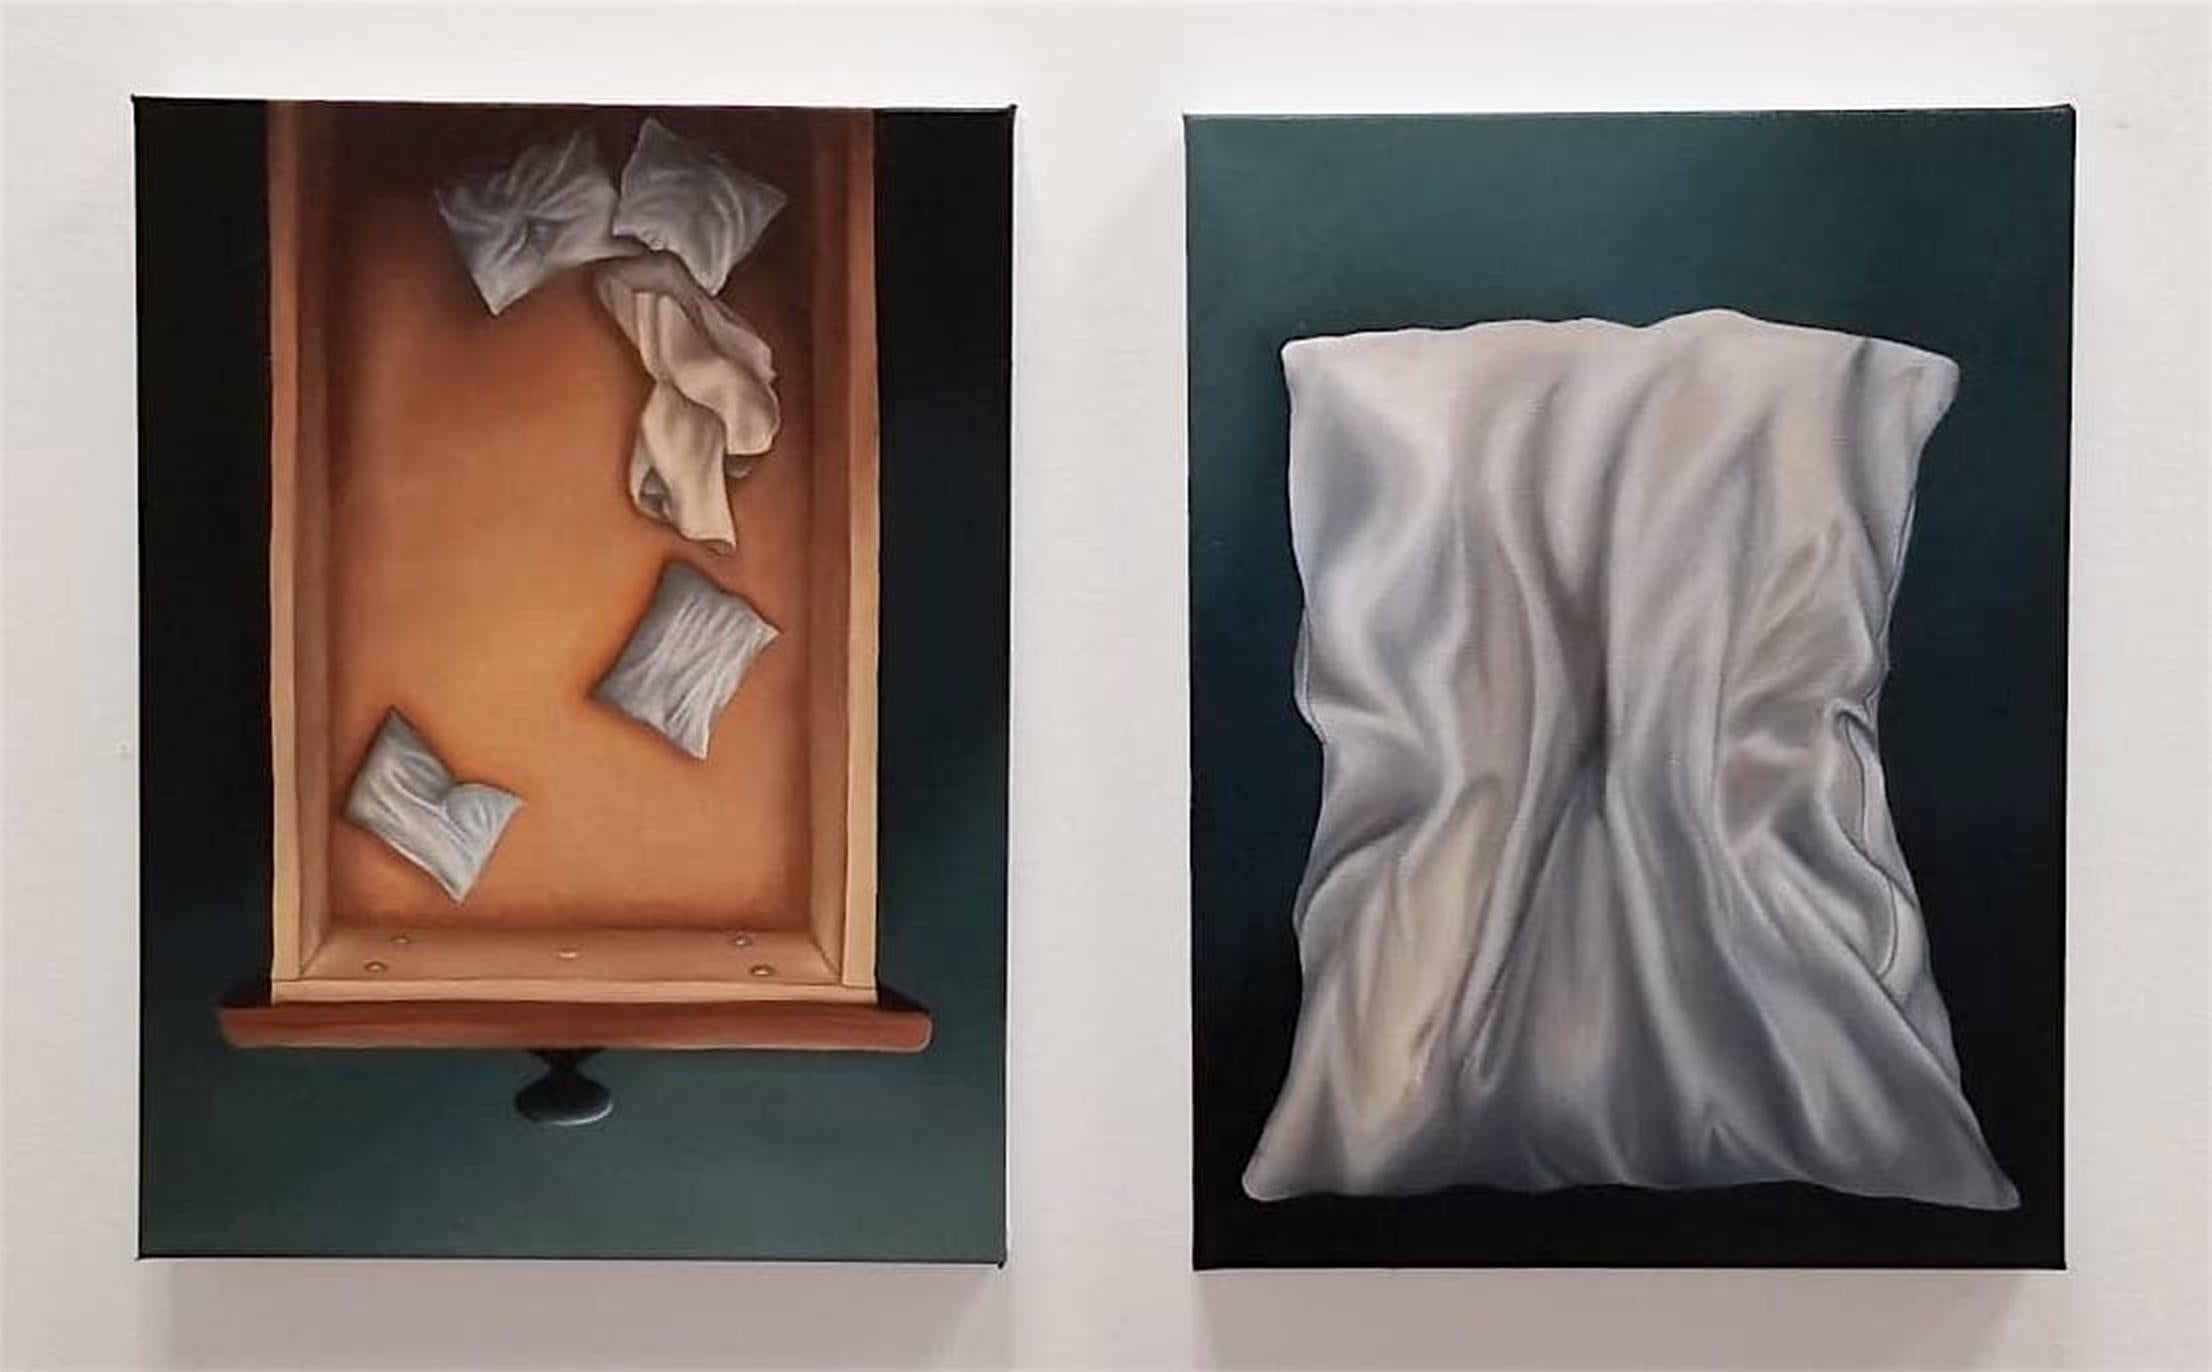 Pull Shapes (Duet) is a diptych that subtly explores surrealism, focusing in on the intimacy of the bedroom space. Pillows are this central point of comfort in our day to day, and the artist wanted to play with scale, mystery, and the night table